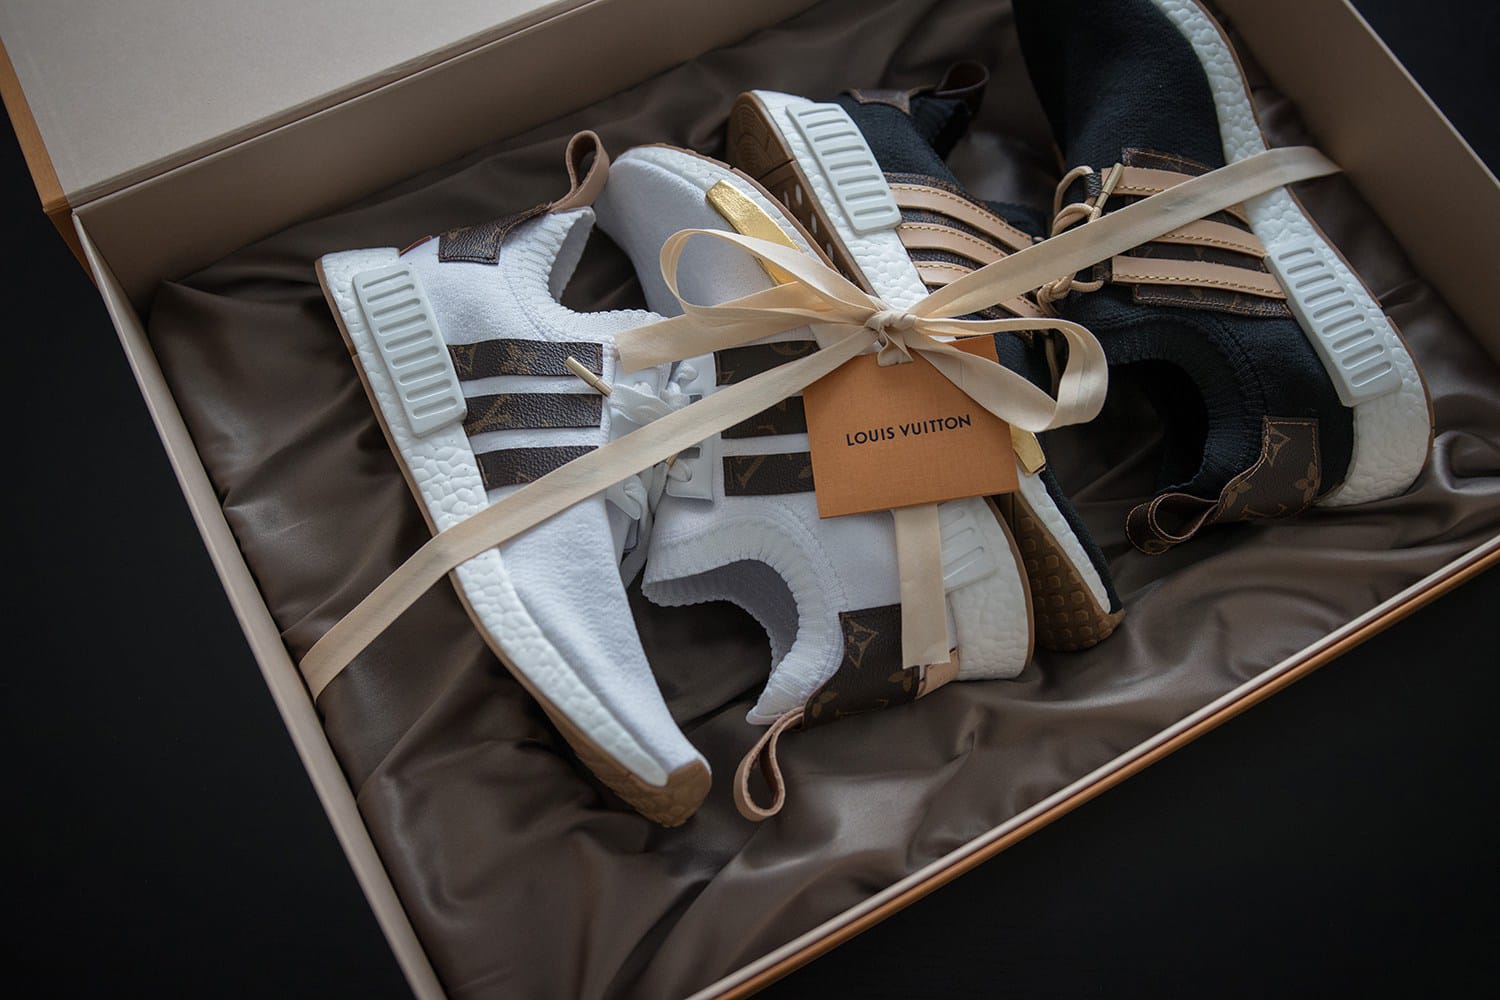 Adidas nmd xr1 finish line exclusive release hypebeast